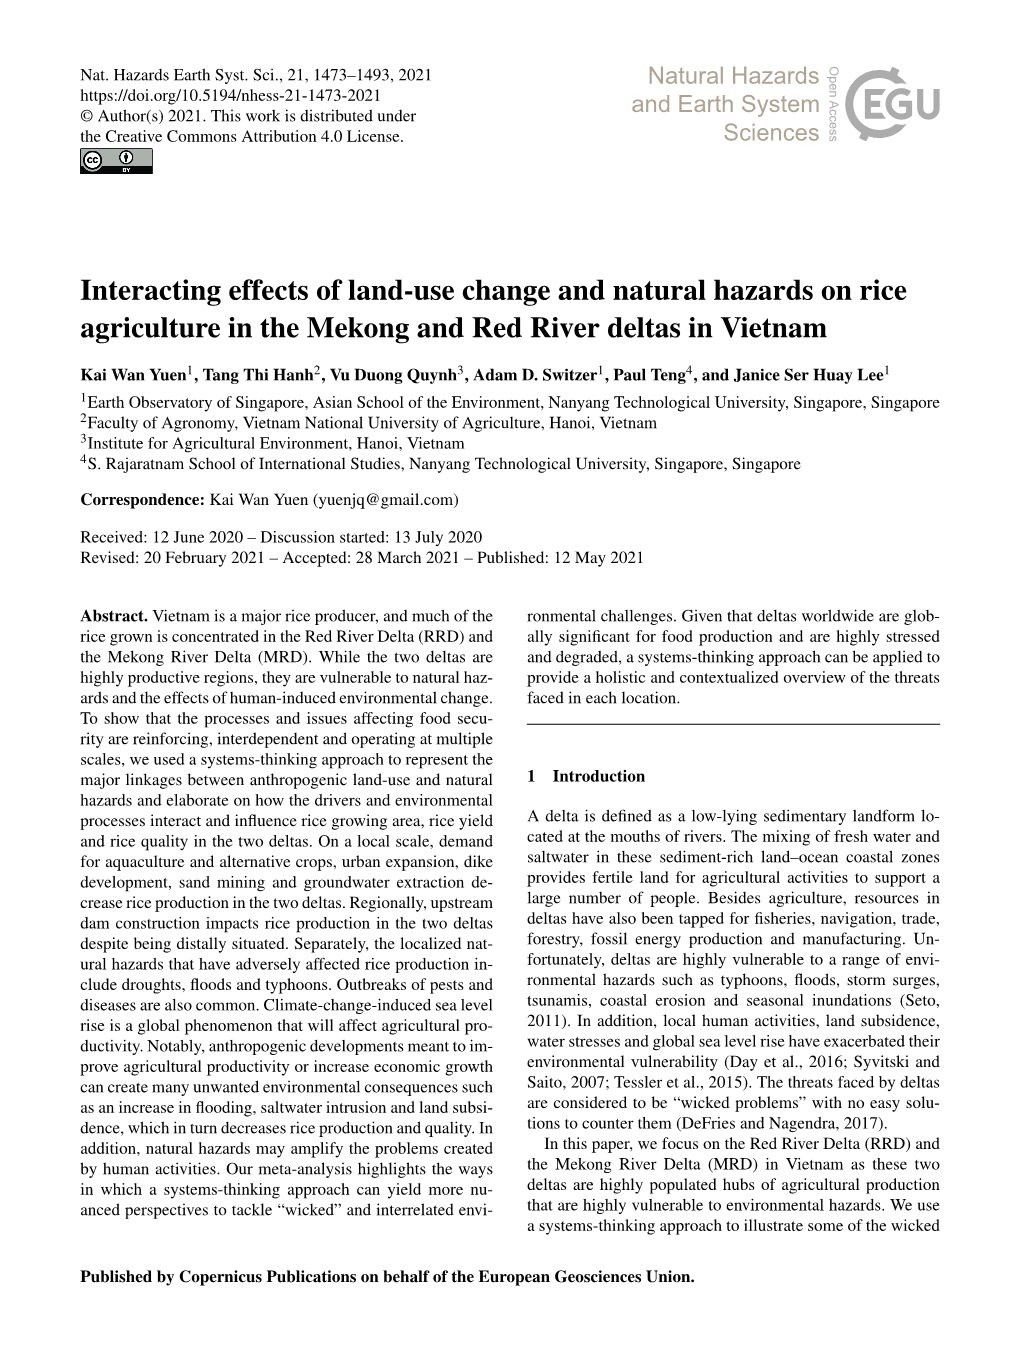 Interacting Effects of Land-Use Change and Natural Hazards on Rice Agriculture in the Mekong and Red River Deltas in Vietnam